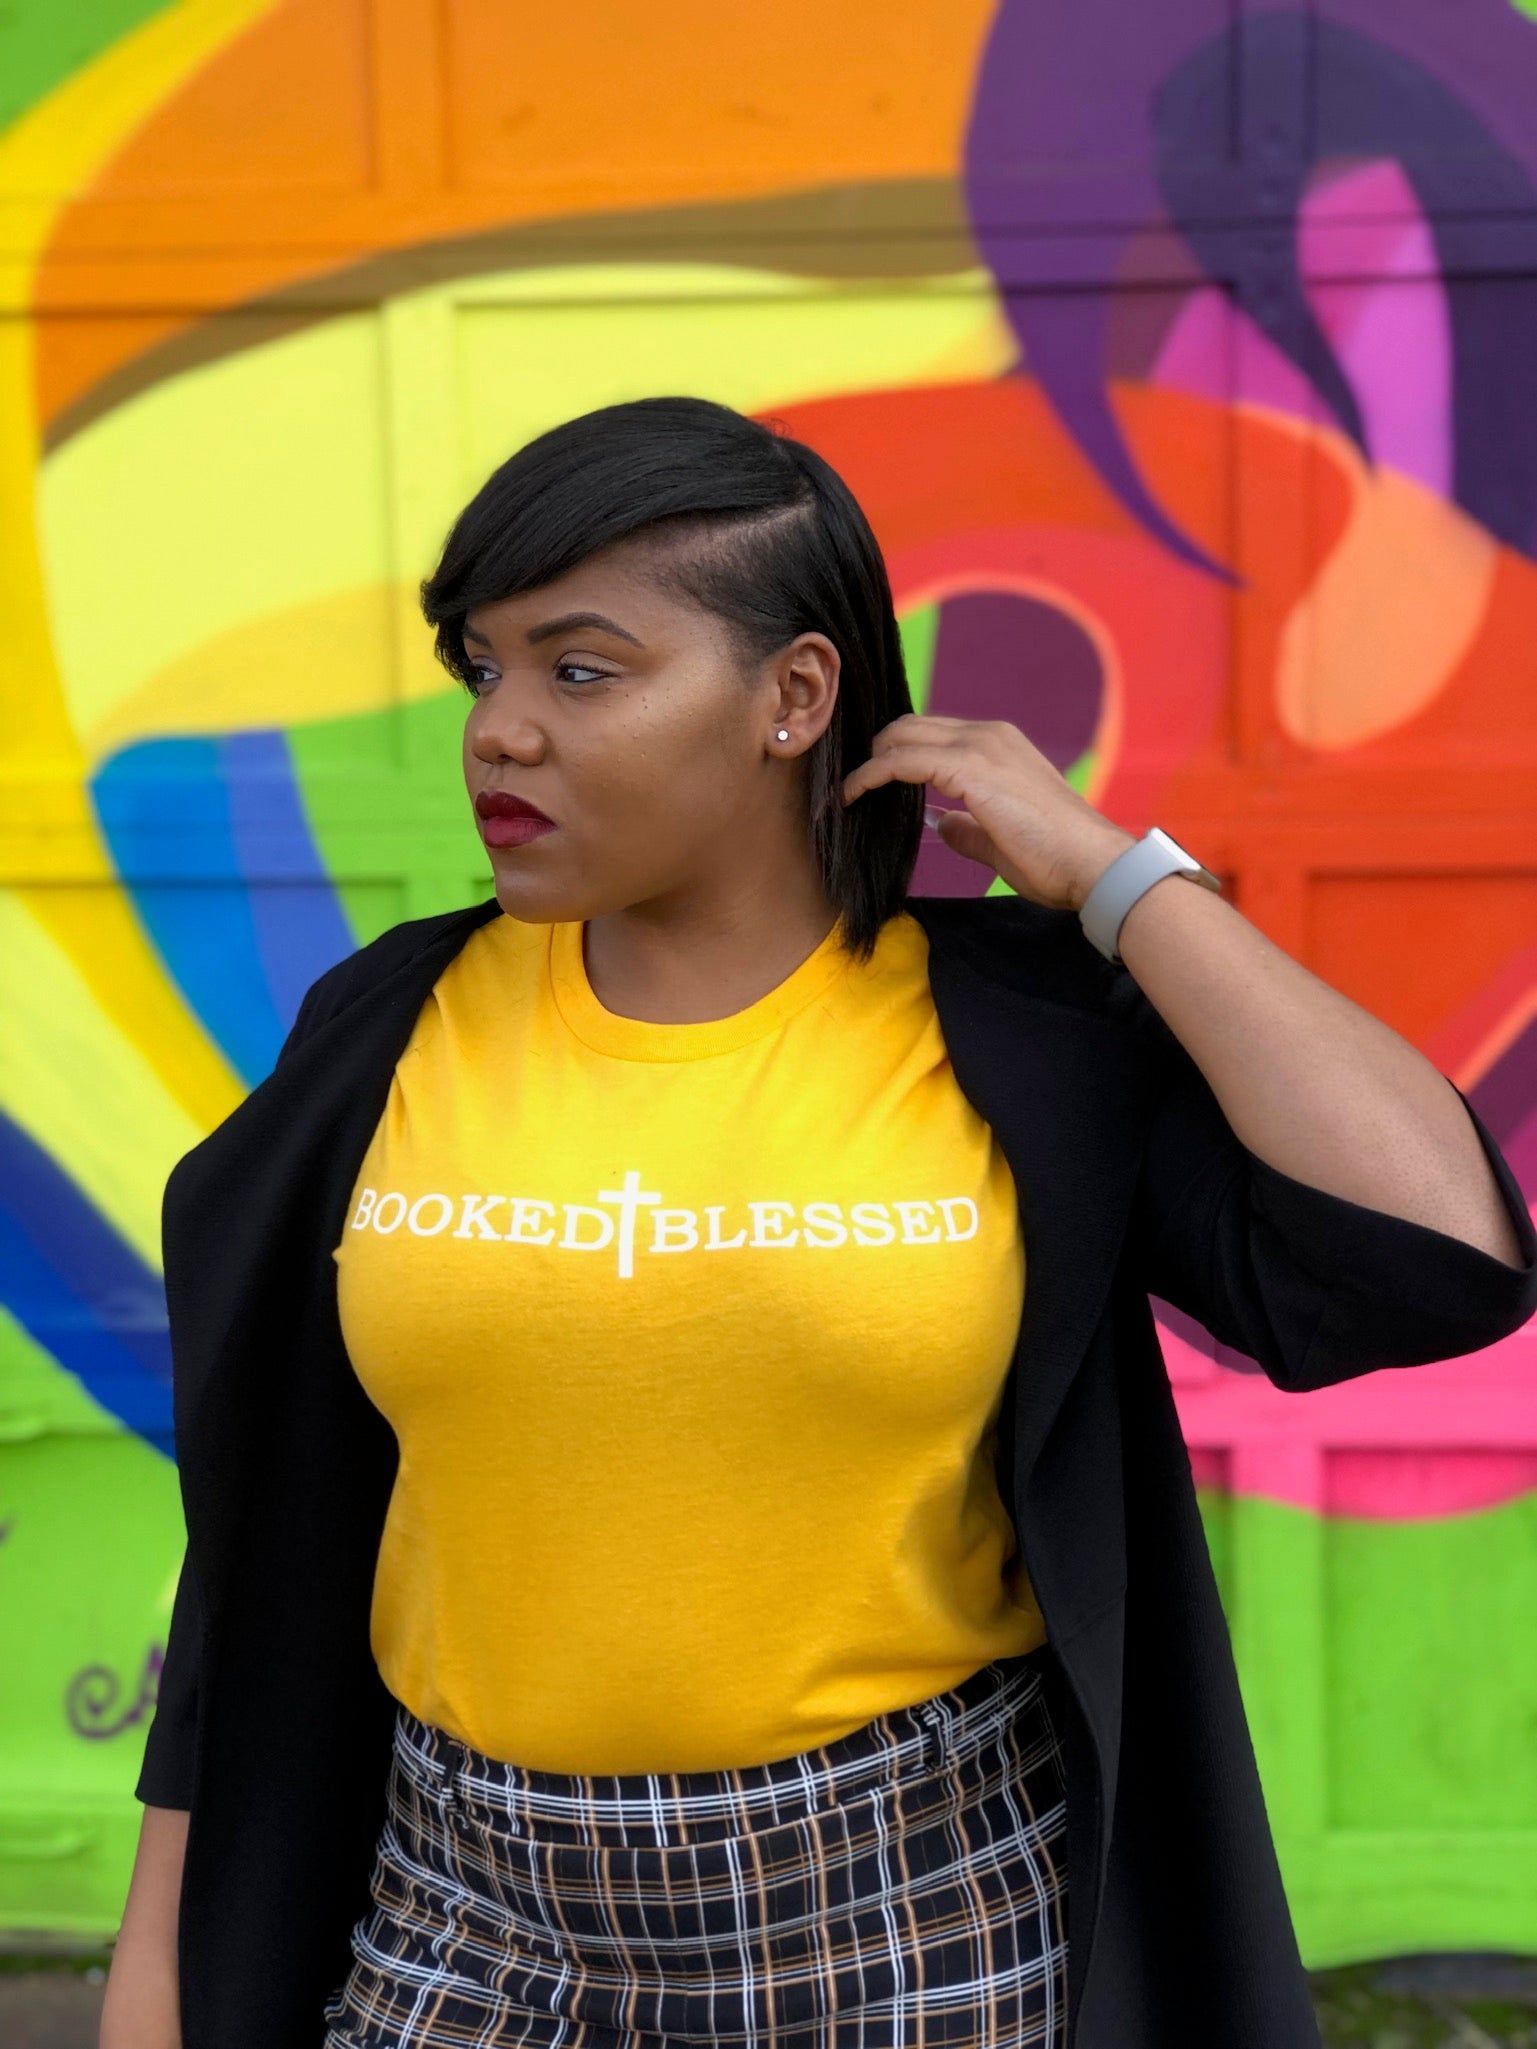 Booked & Blessed T-Shirt